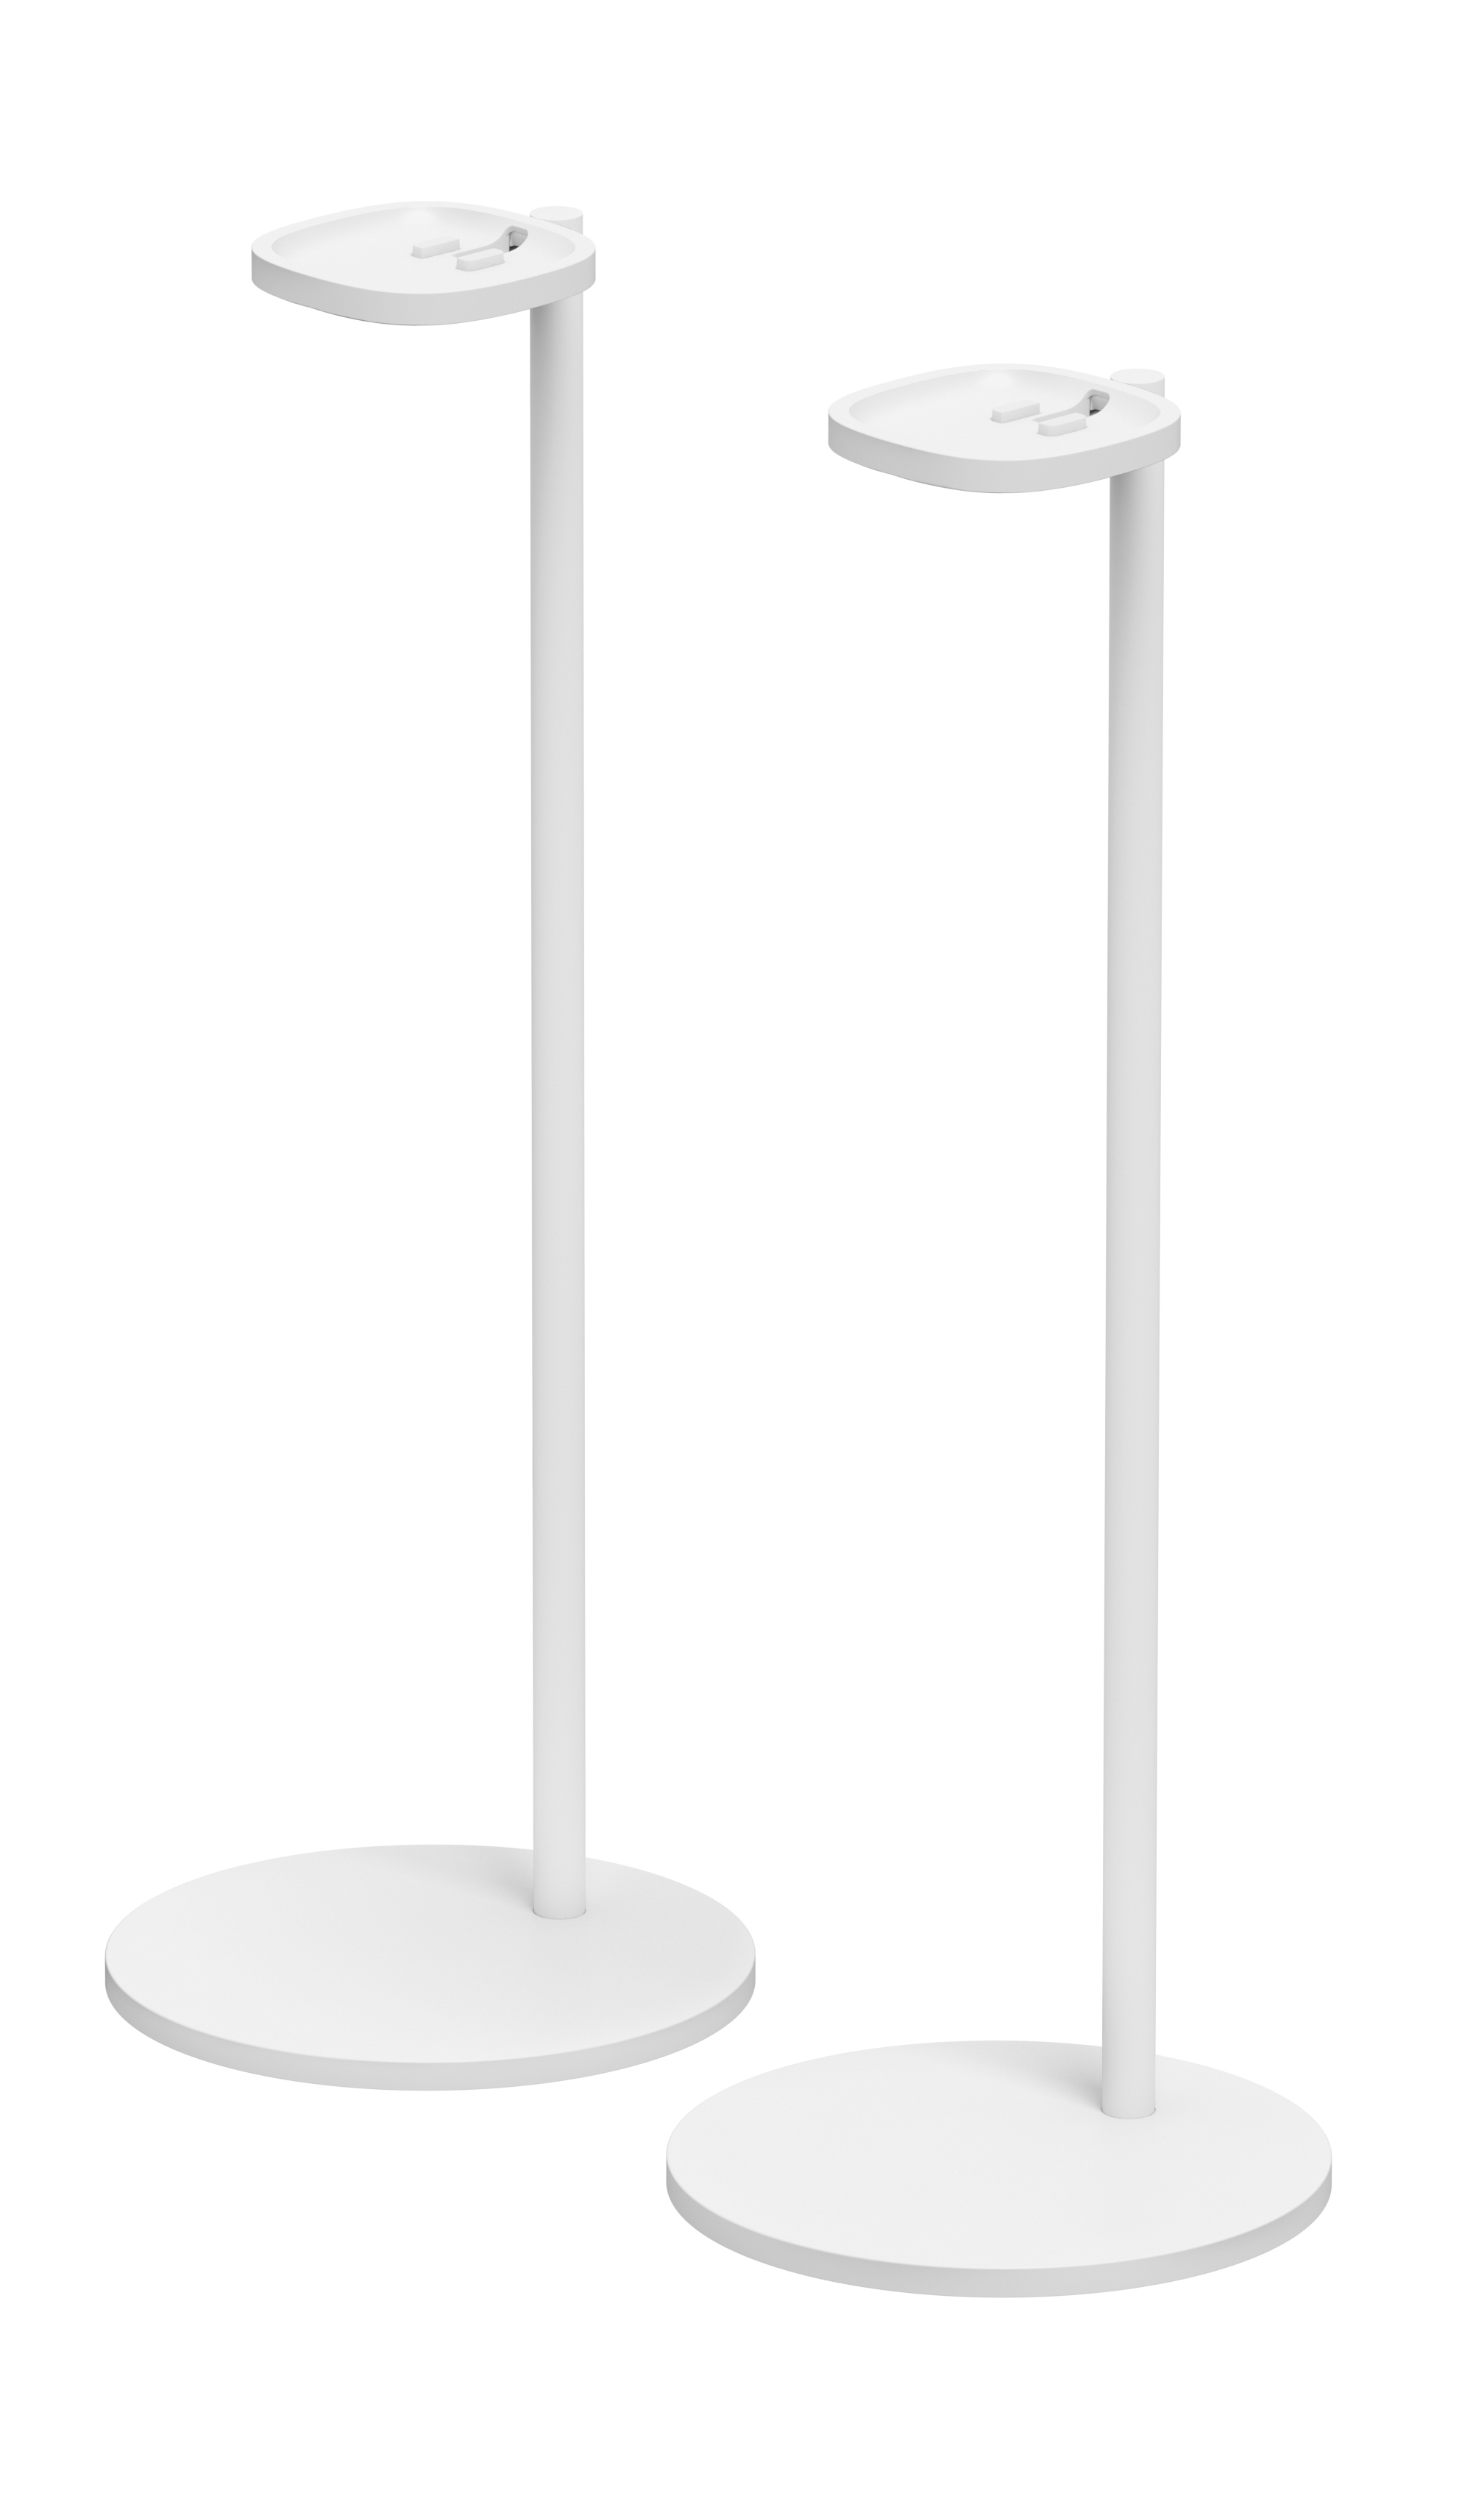 Weiß ONE/PLAY:1 SONOS Standfuß, for Stands